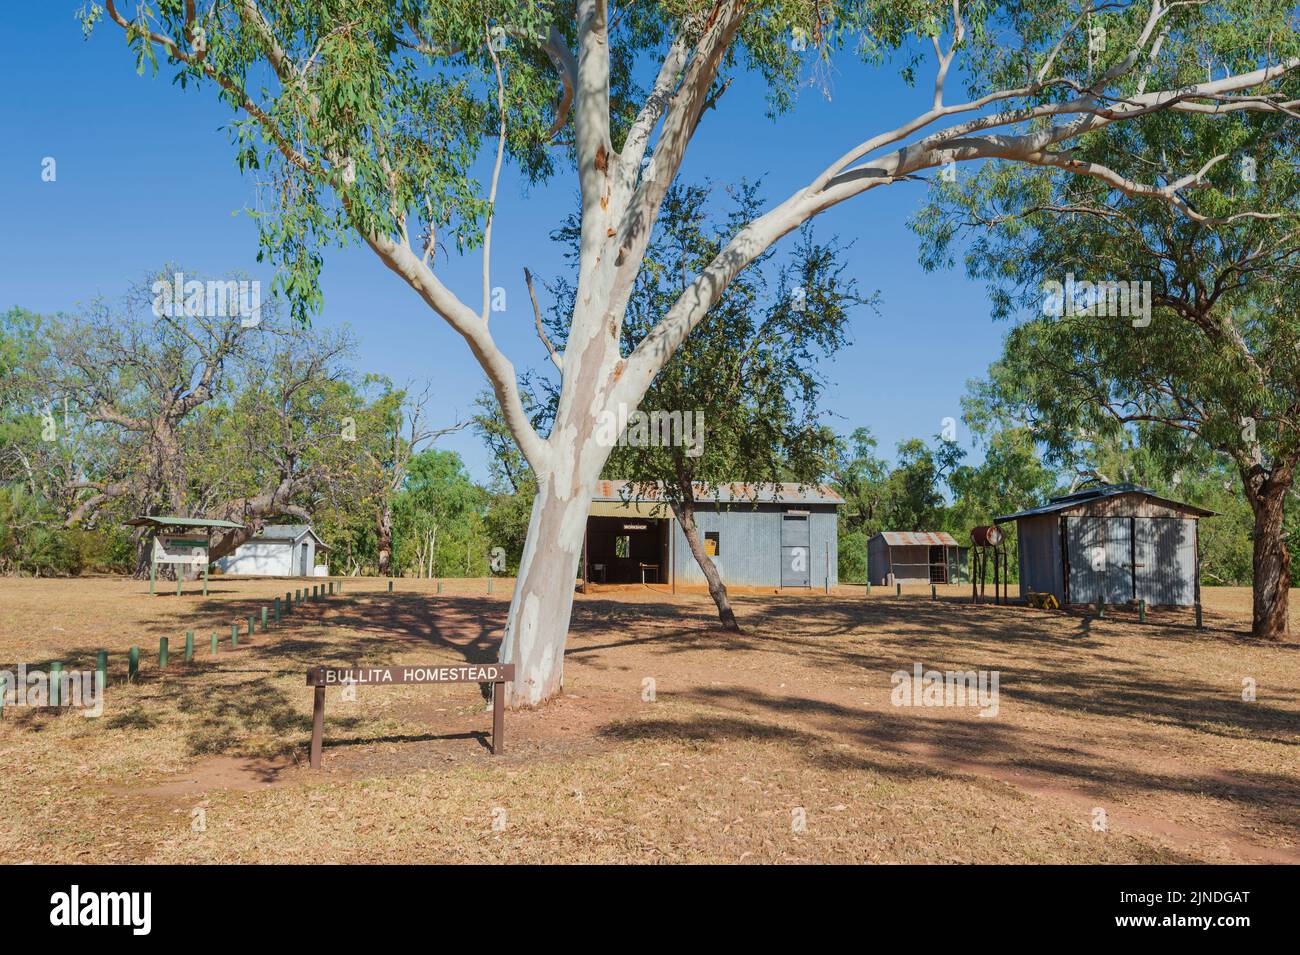 View of the historic Bullita Homestead, once an outstation owned by the Durack family and managed by Charlie Schultz, Judbarra/Gregory National Park, Stock Photo